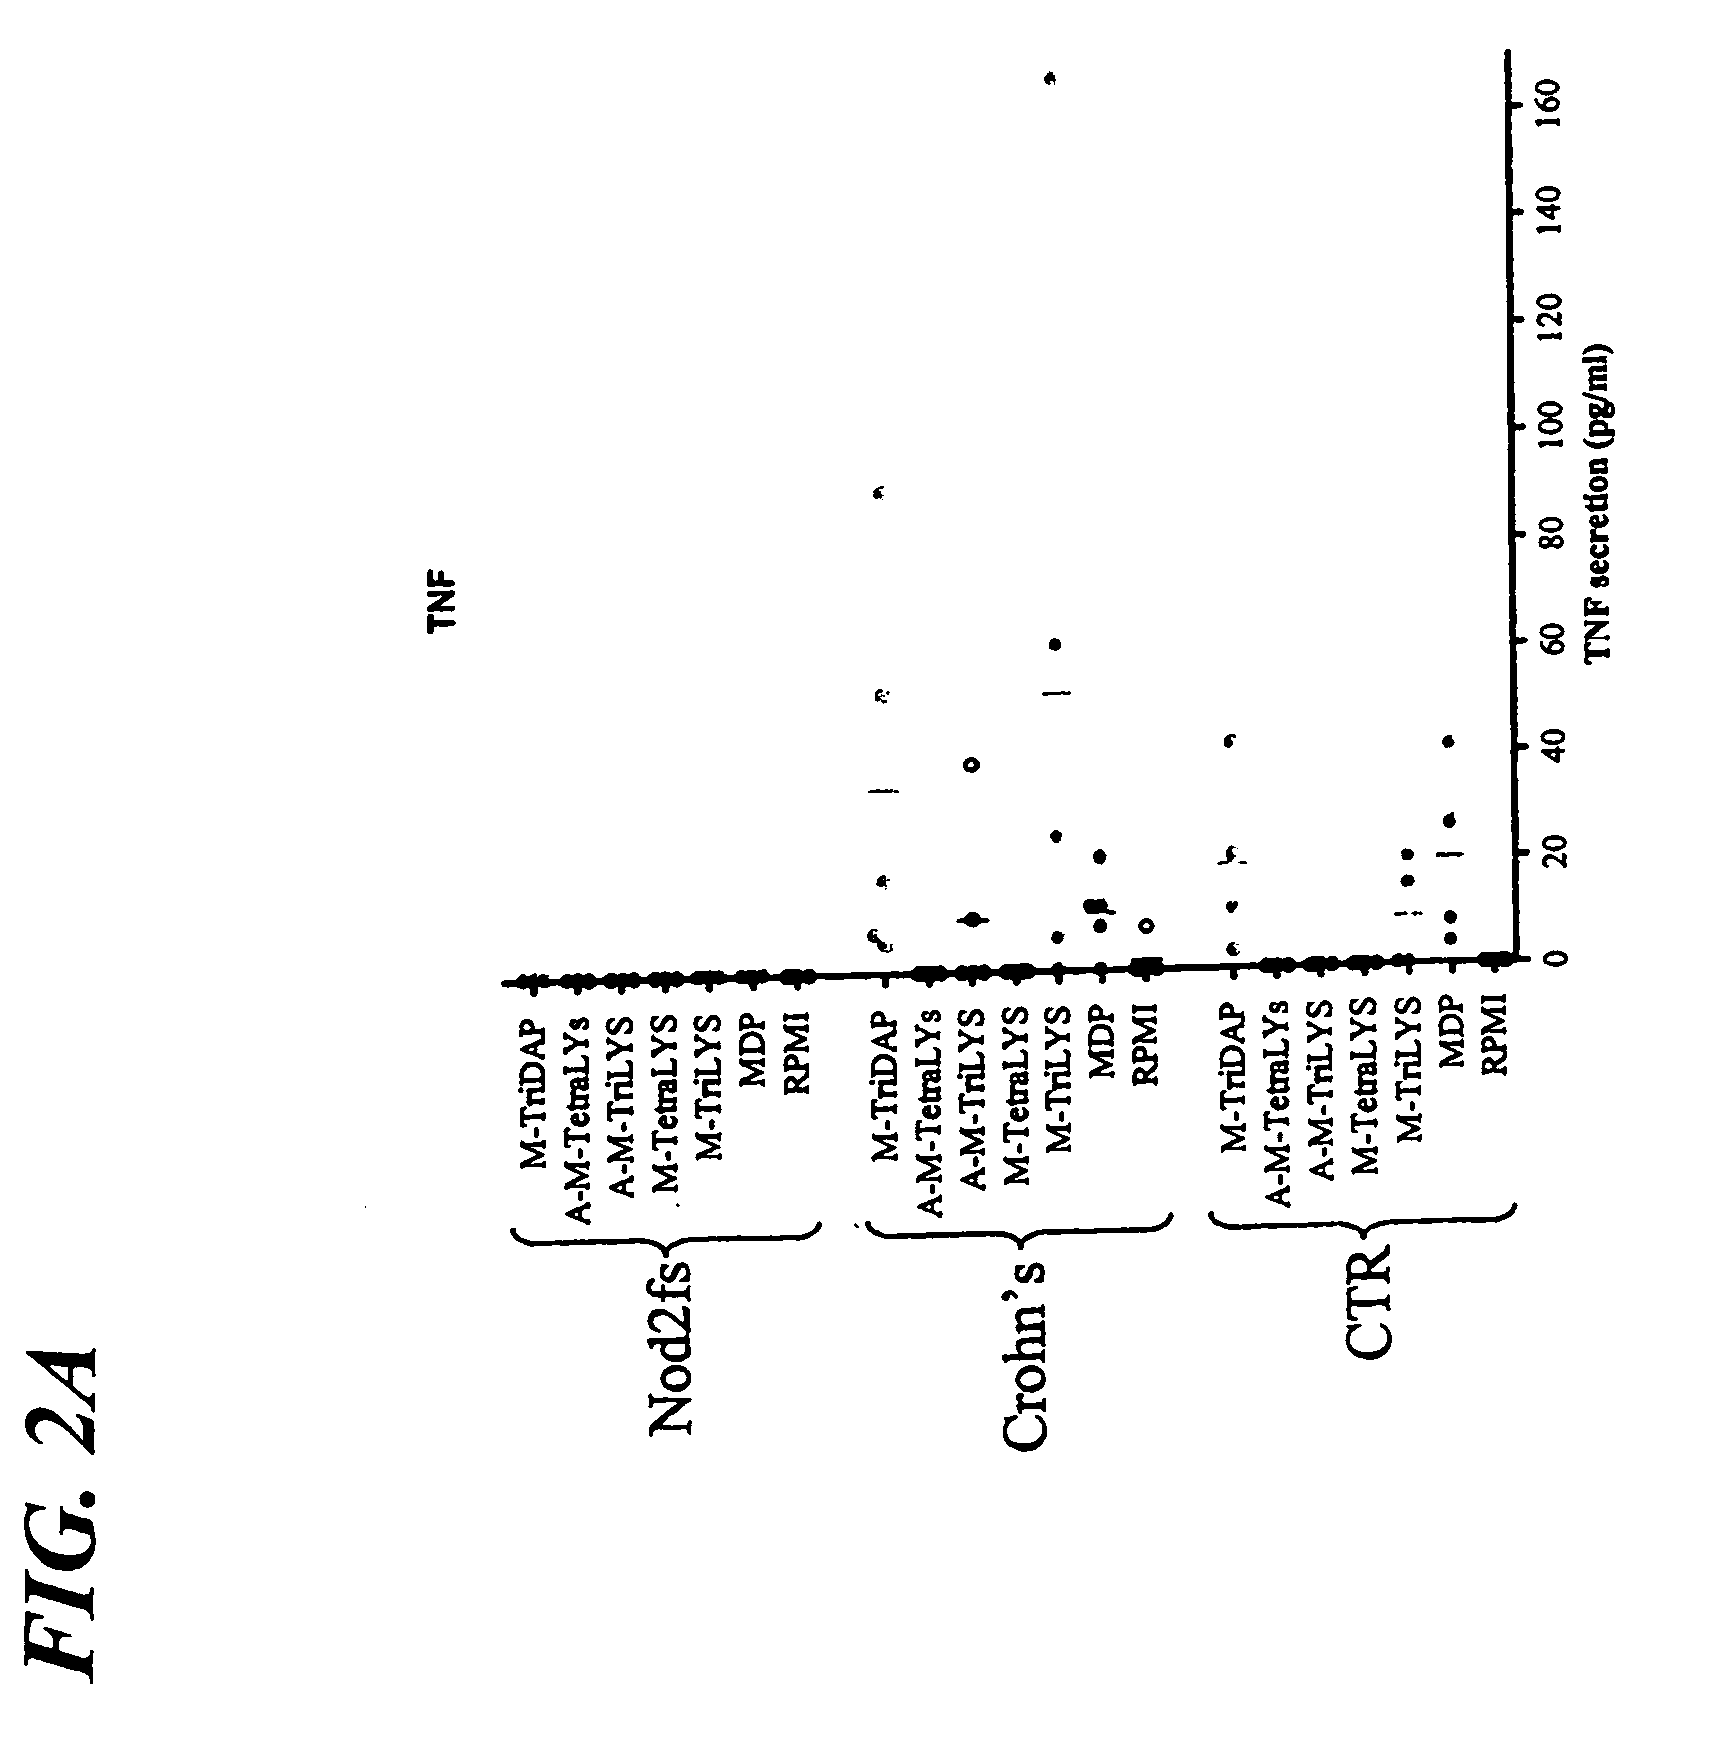 Method for screening molecules that restore NOD1 activity in cells containing an NOD2 mutation that reduces or eliminates NOD1 activity